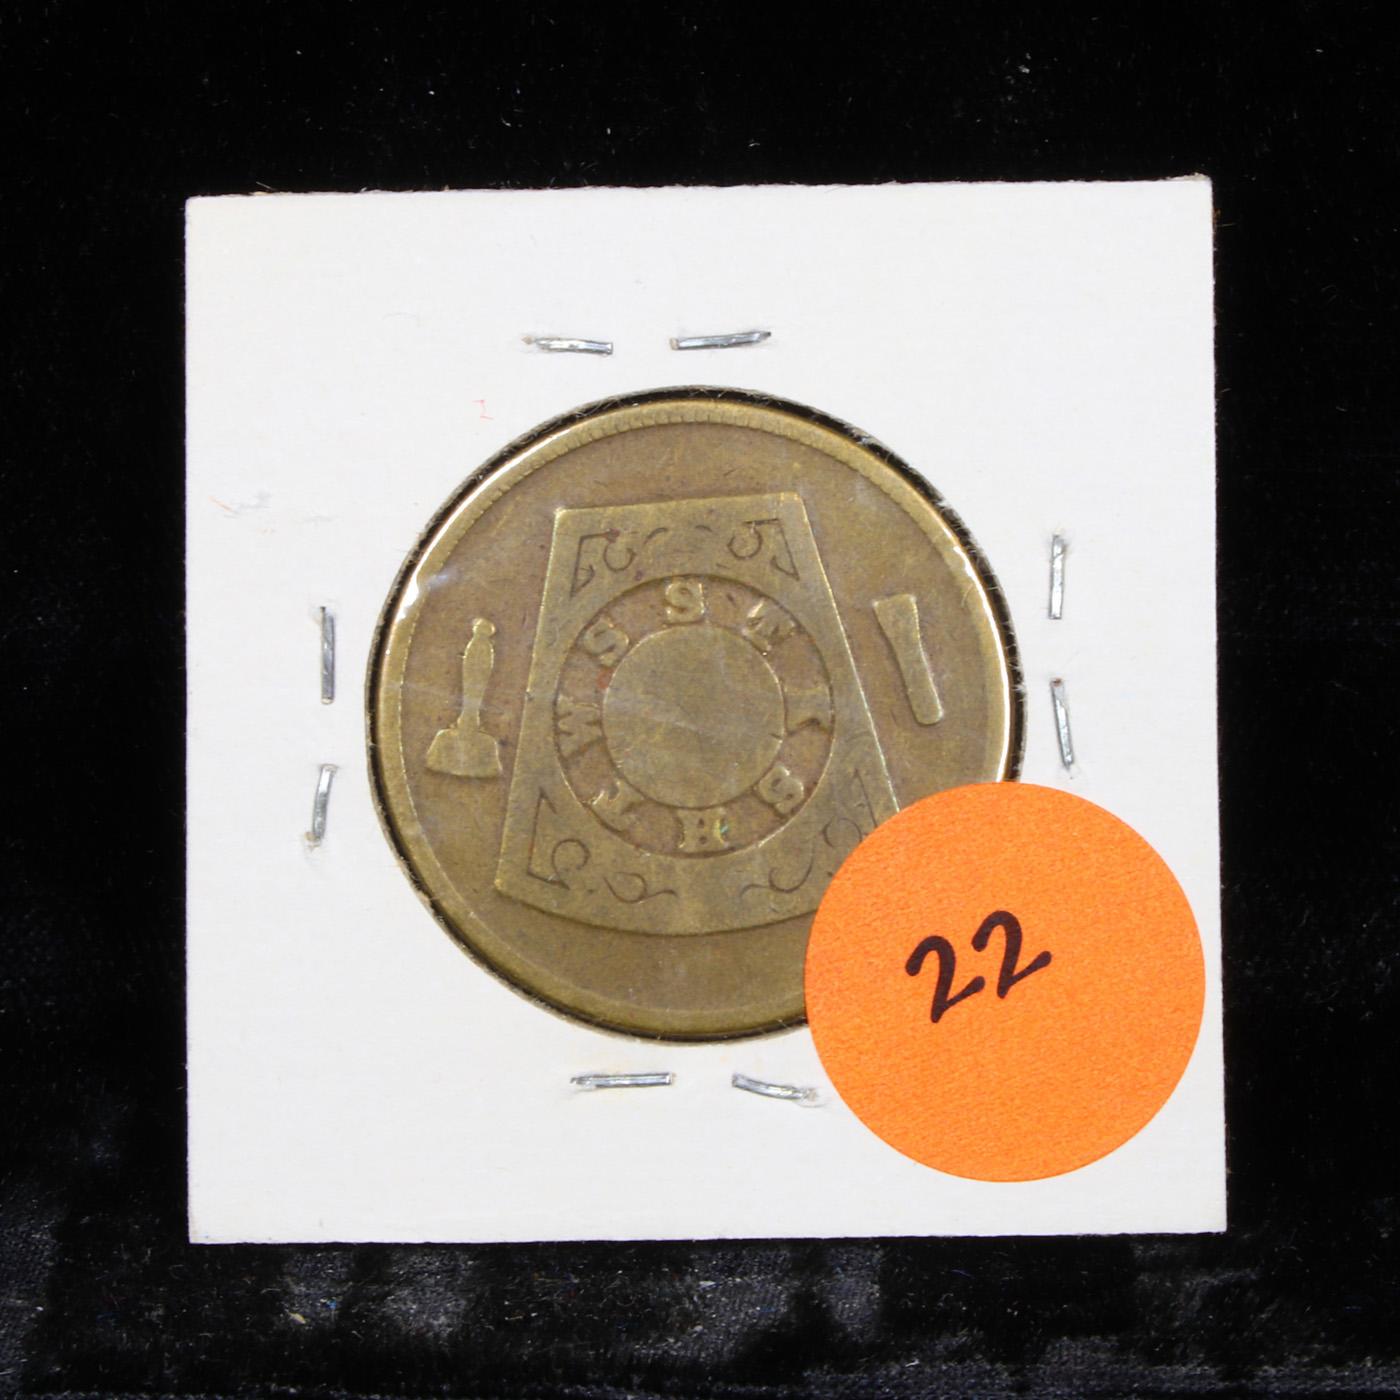 Lot #1 of the 450 Masonic Tokens from The Walter O. Collection